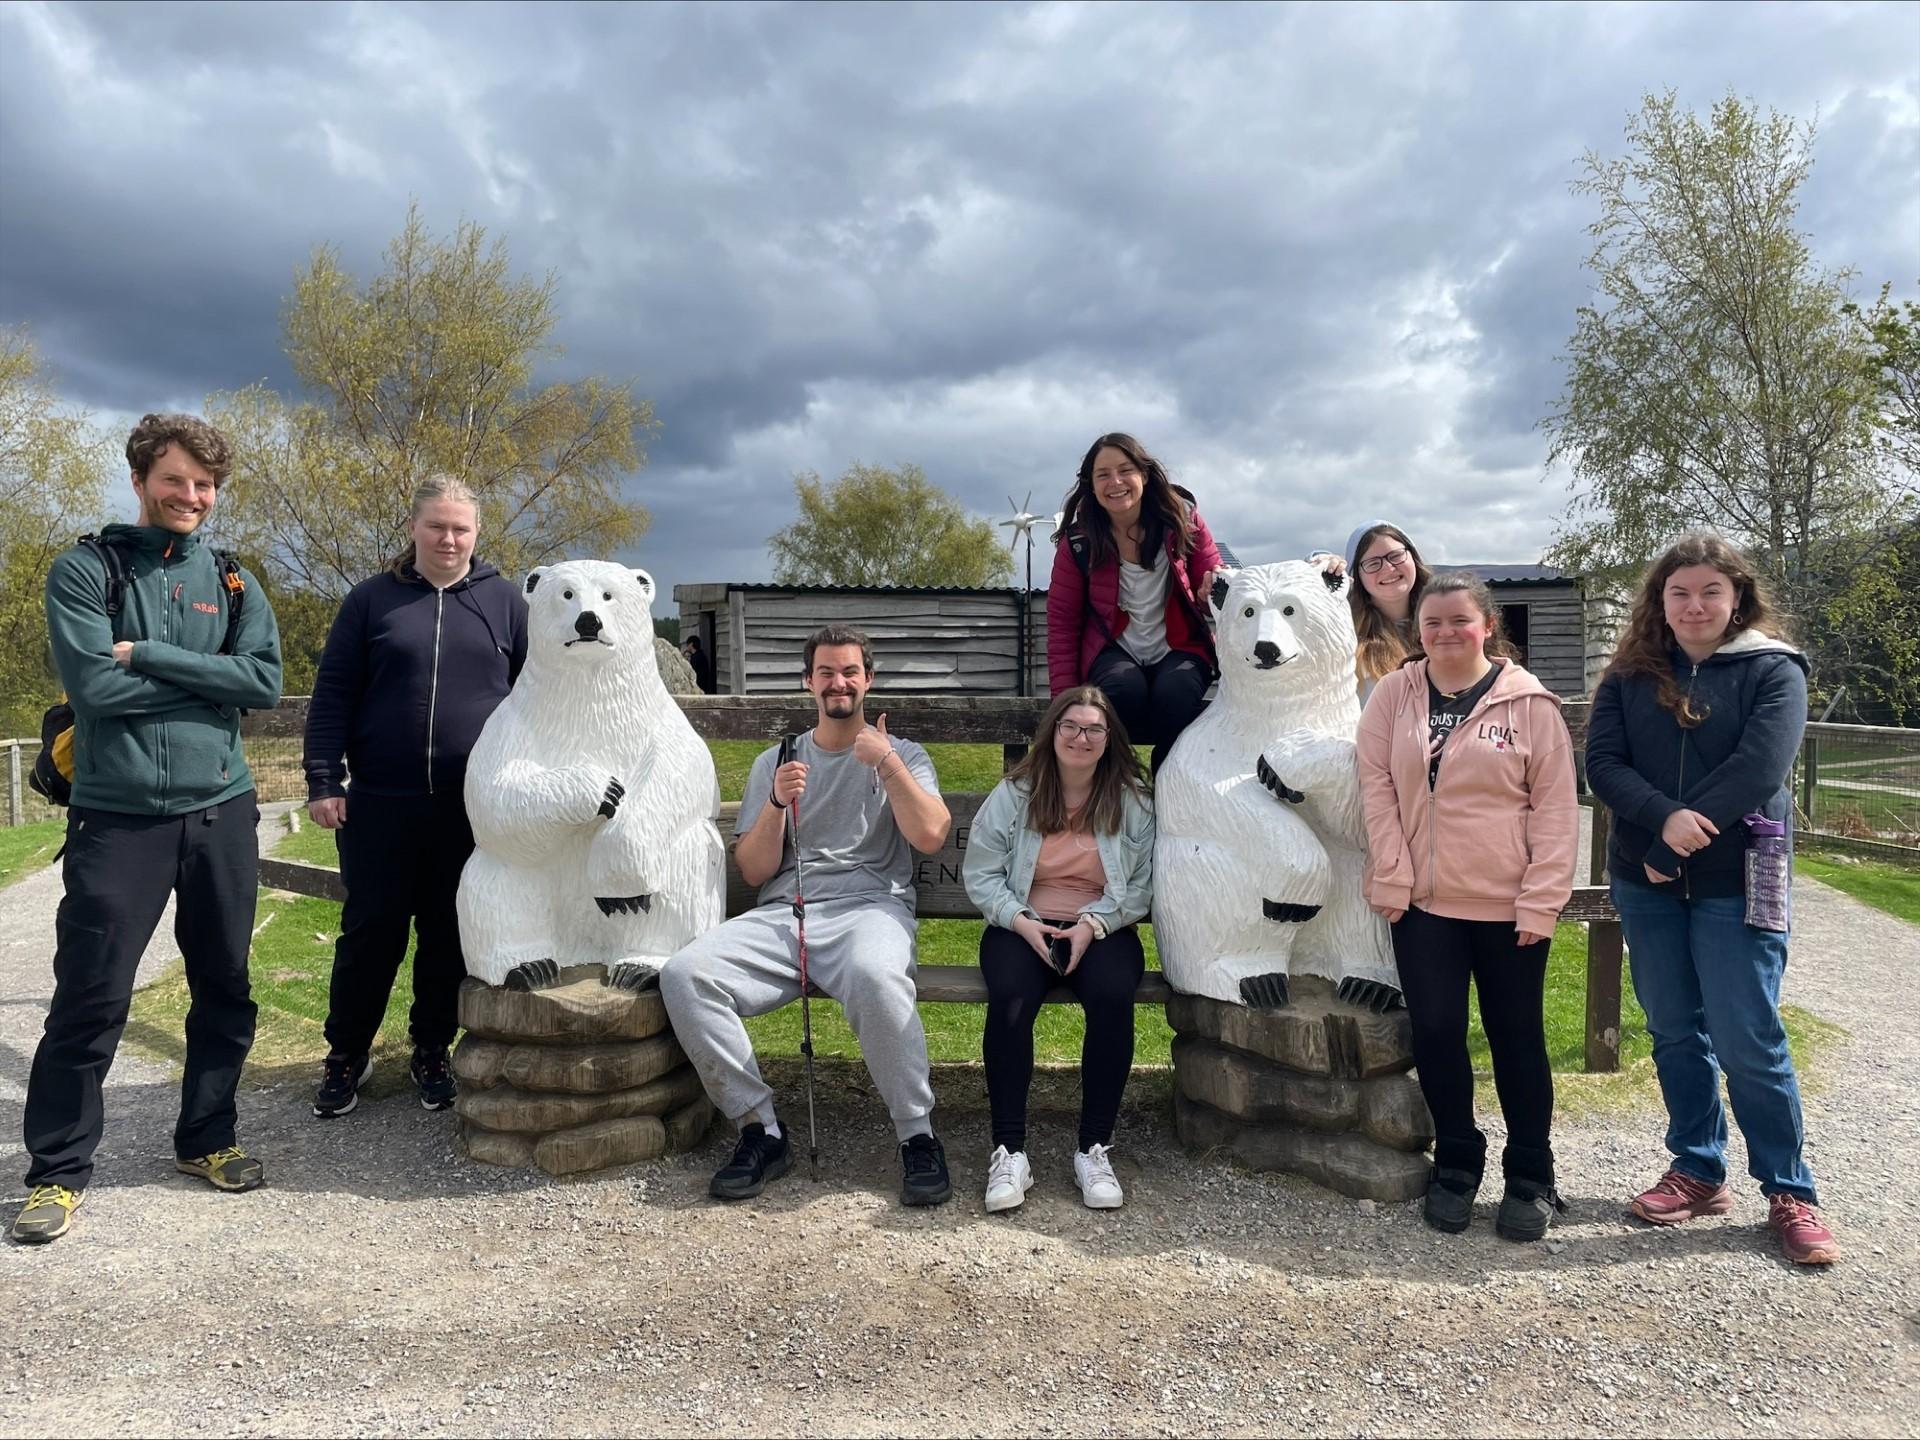 UHI Perth students pose for photo by small polar bear statues during visit to Highland Wildlife Park